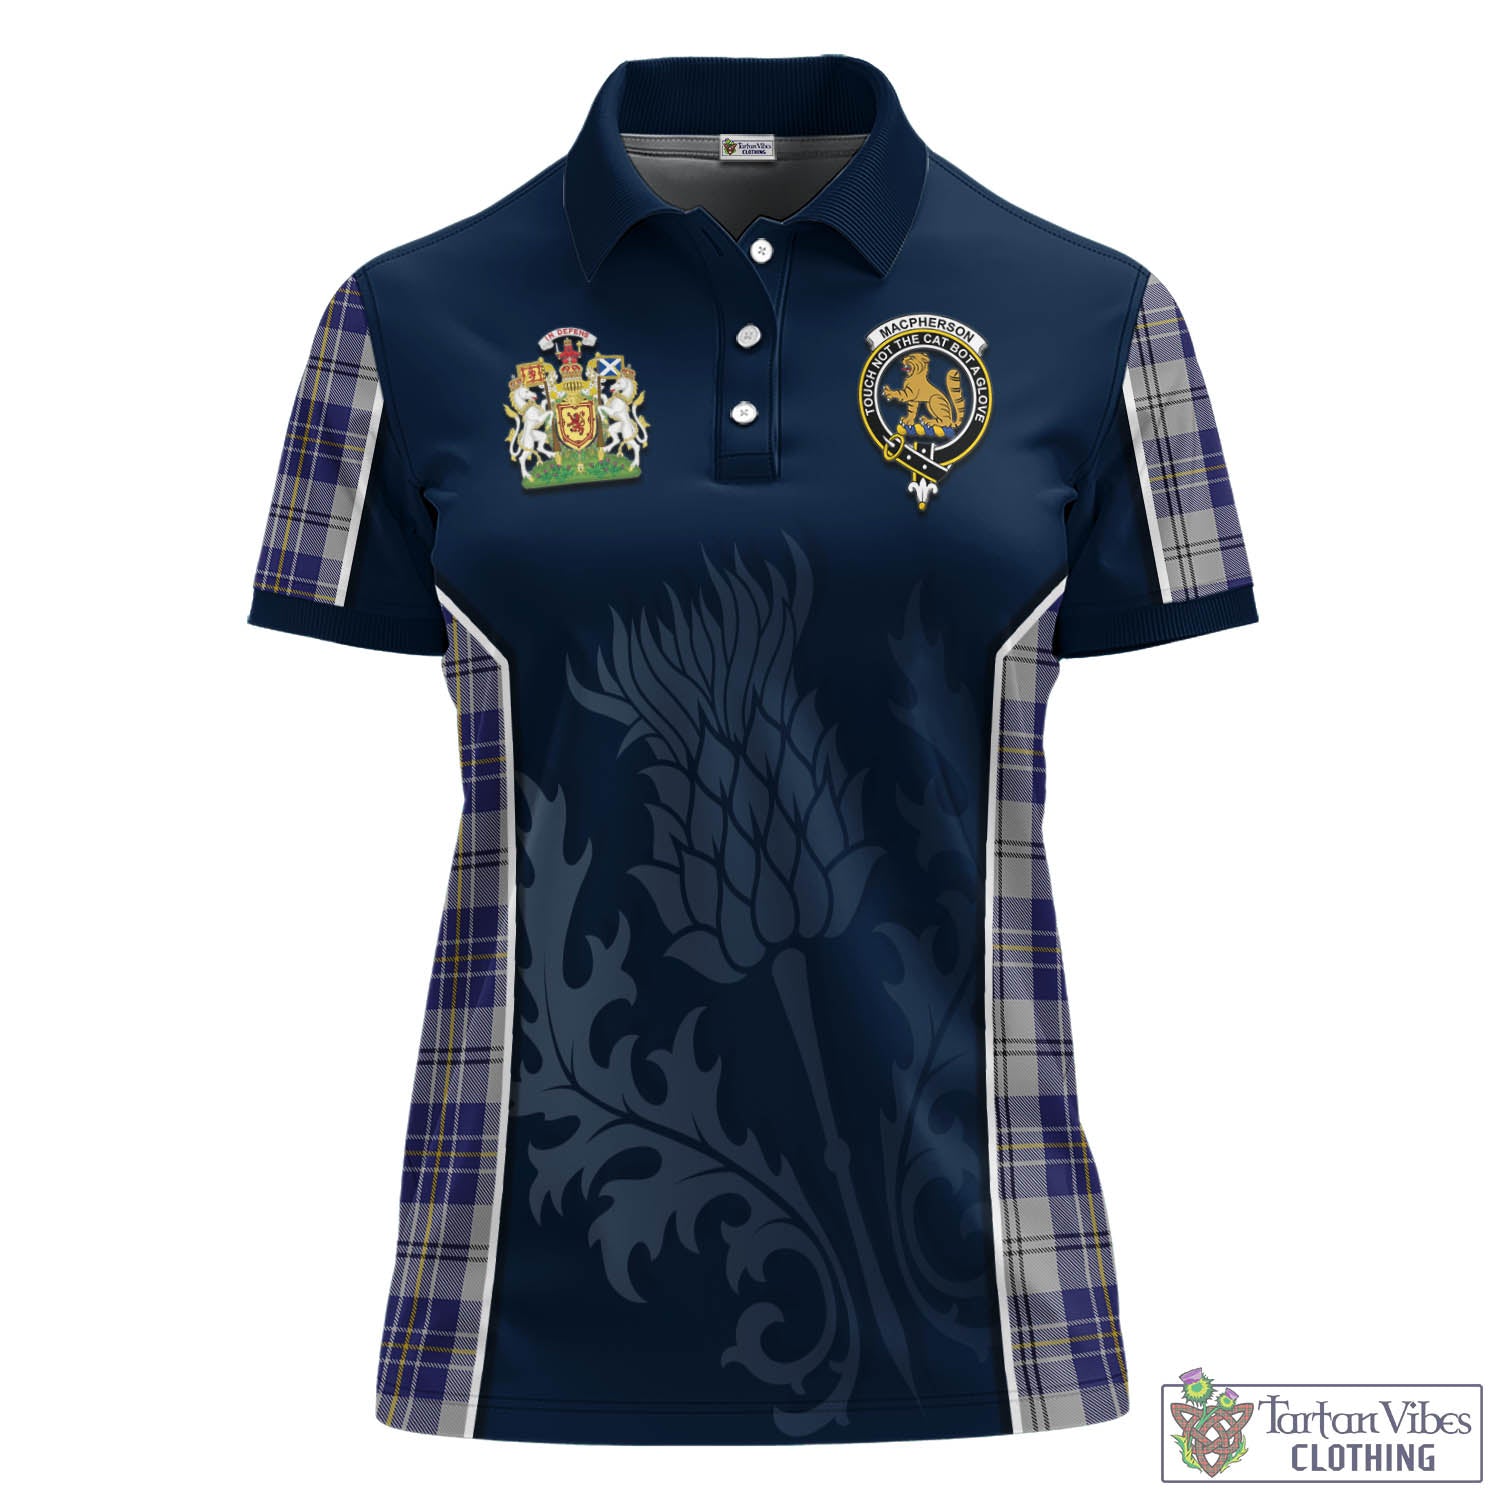 Tartan Vibes Clothing MacPherson Dress Blue Tartan Women's Polo Shirt with Family Crest and Scottish Thistle Vibes Sport Style